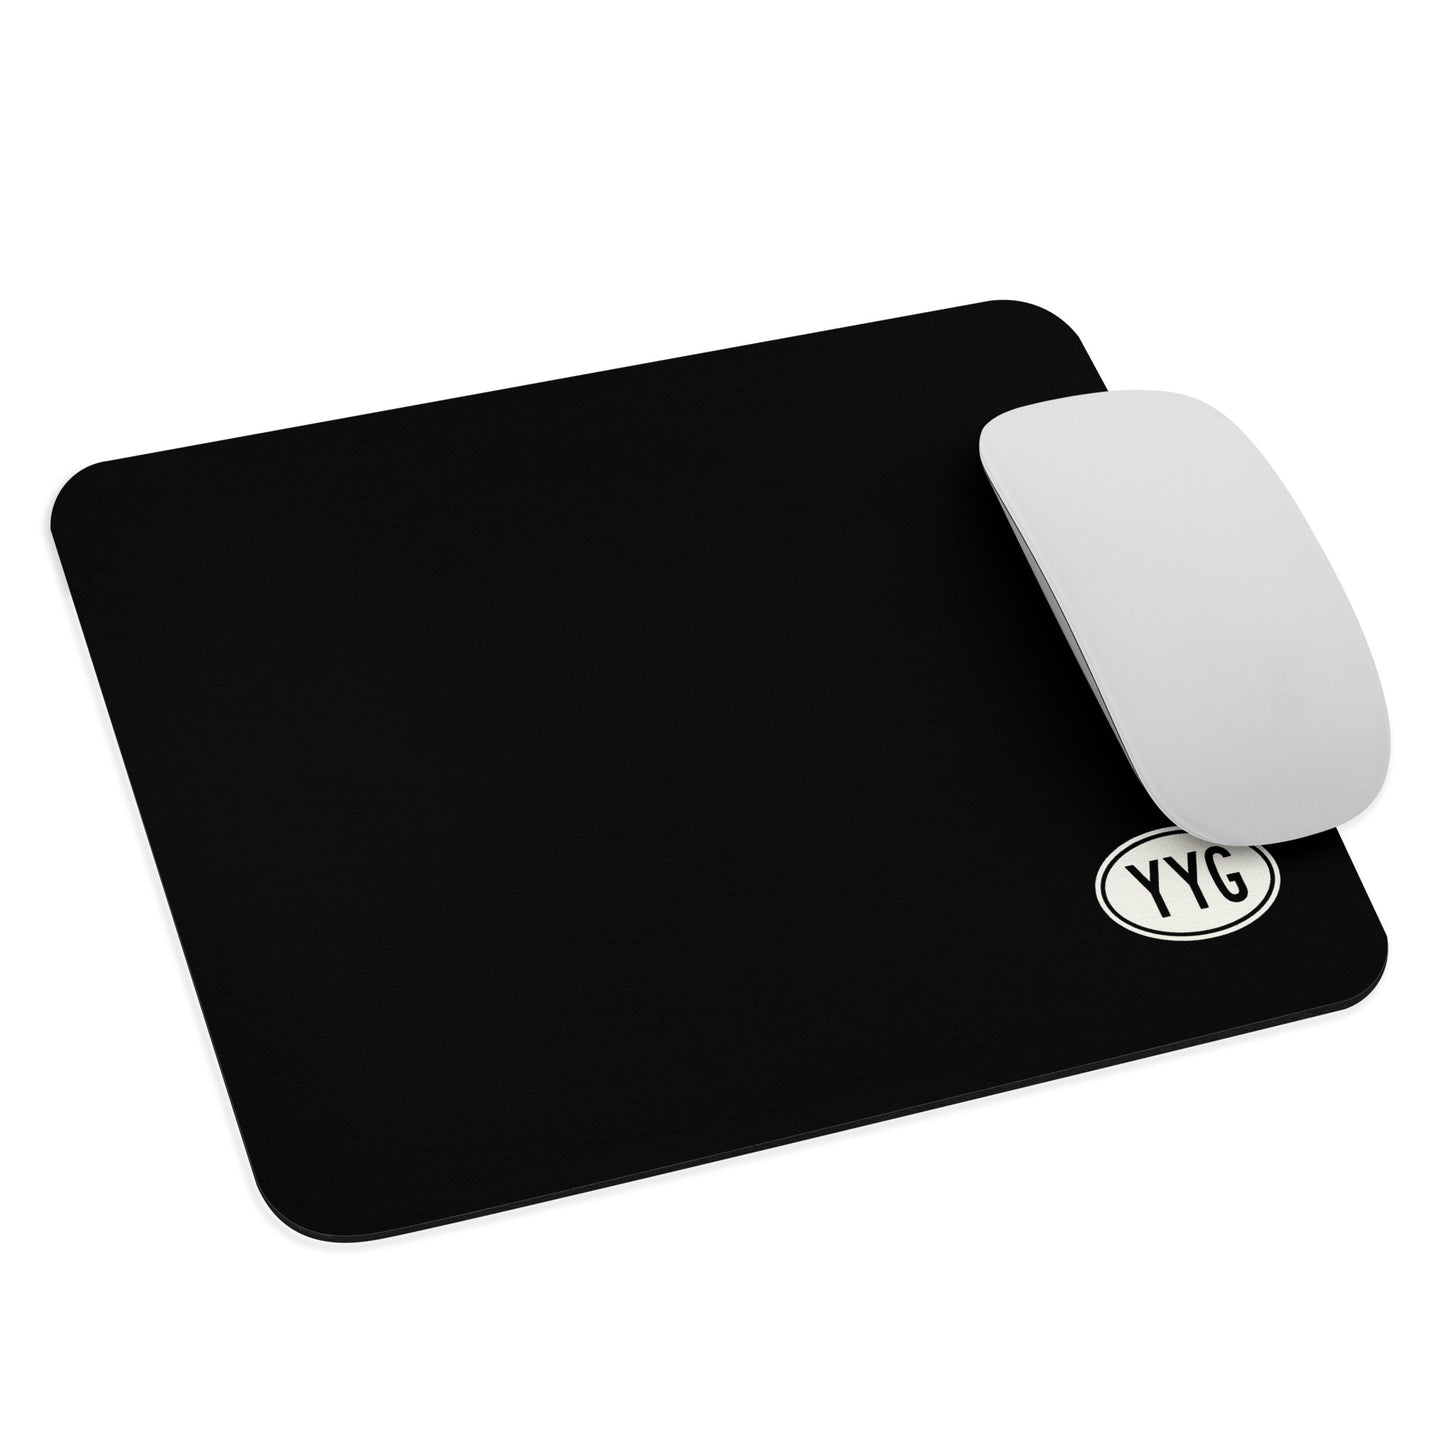 Unique Travel Gift Mouse Pad - White Oval • YYG Charlottetown • YHM Designs - Image 03